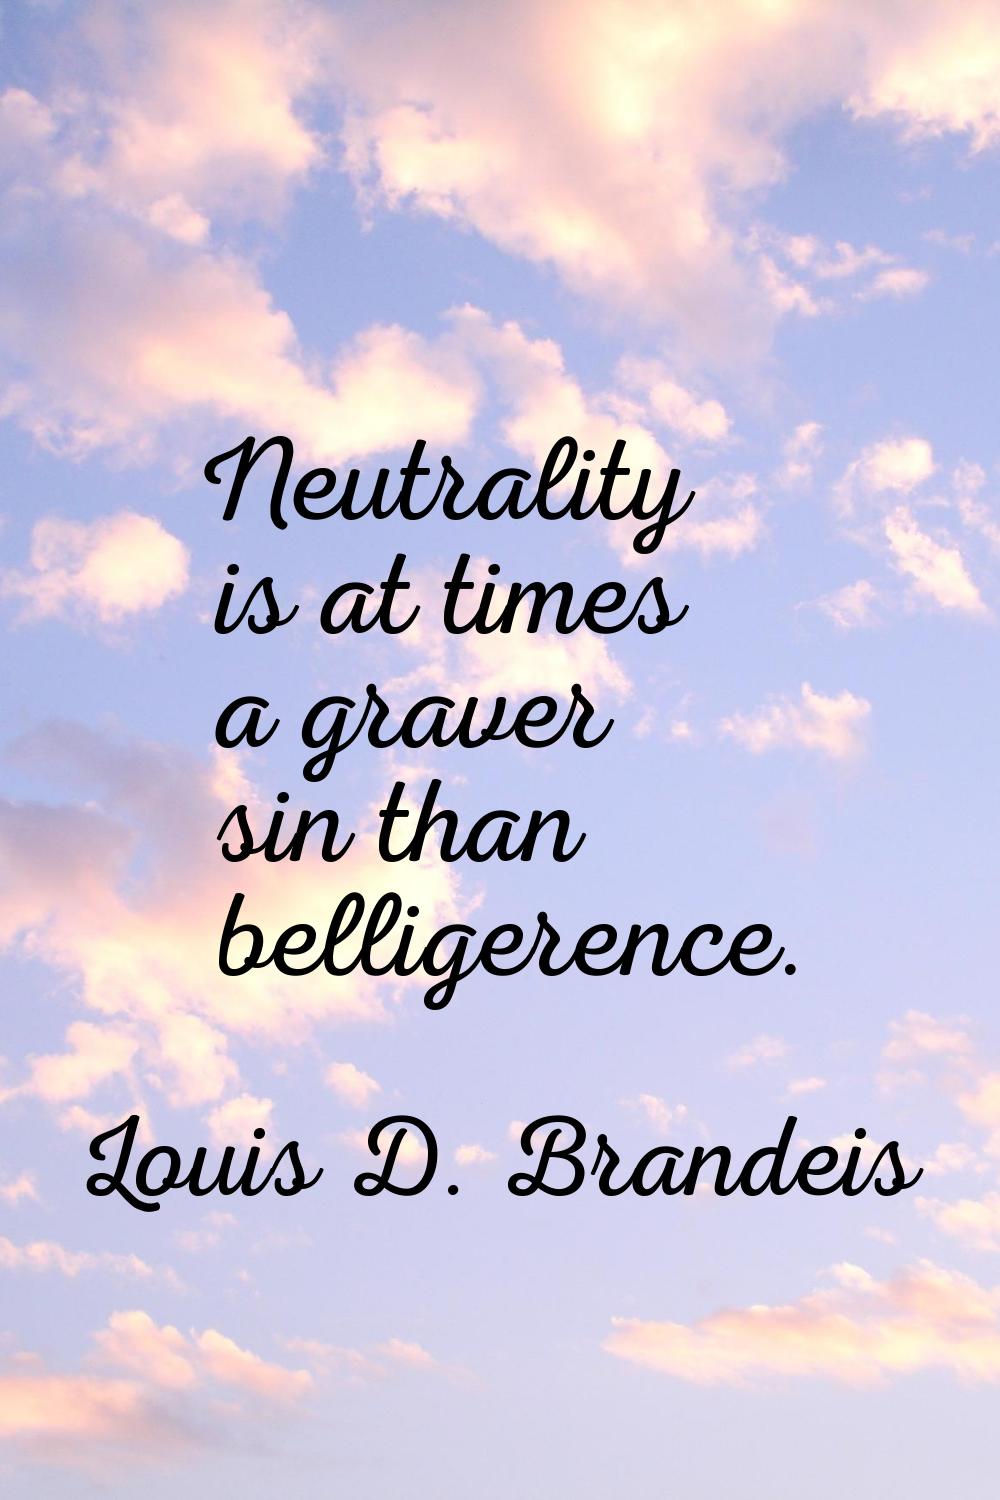 Neutrality is at times a graver sin than belligerence.